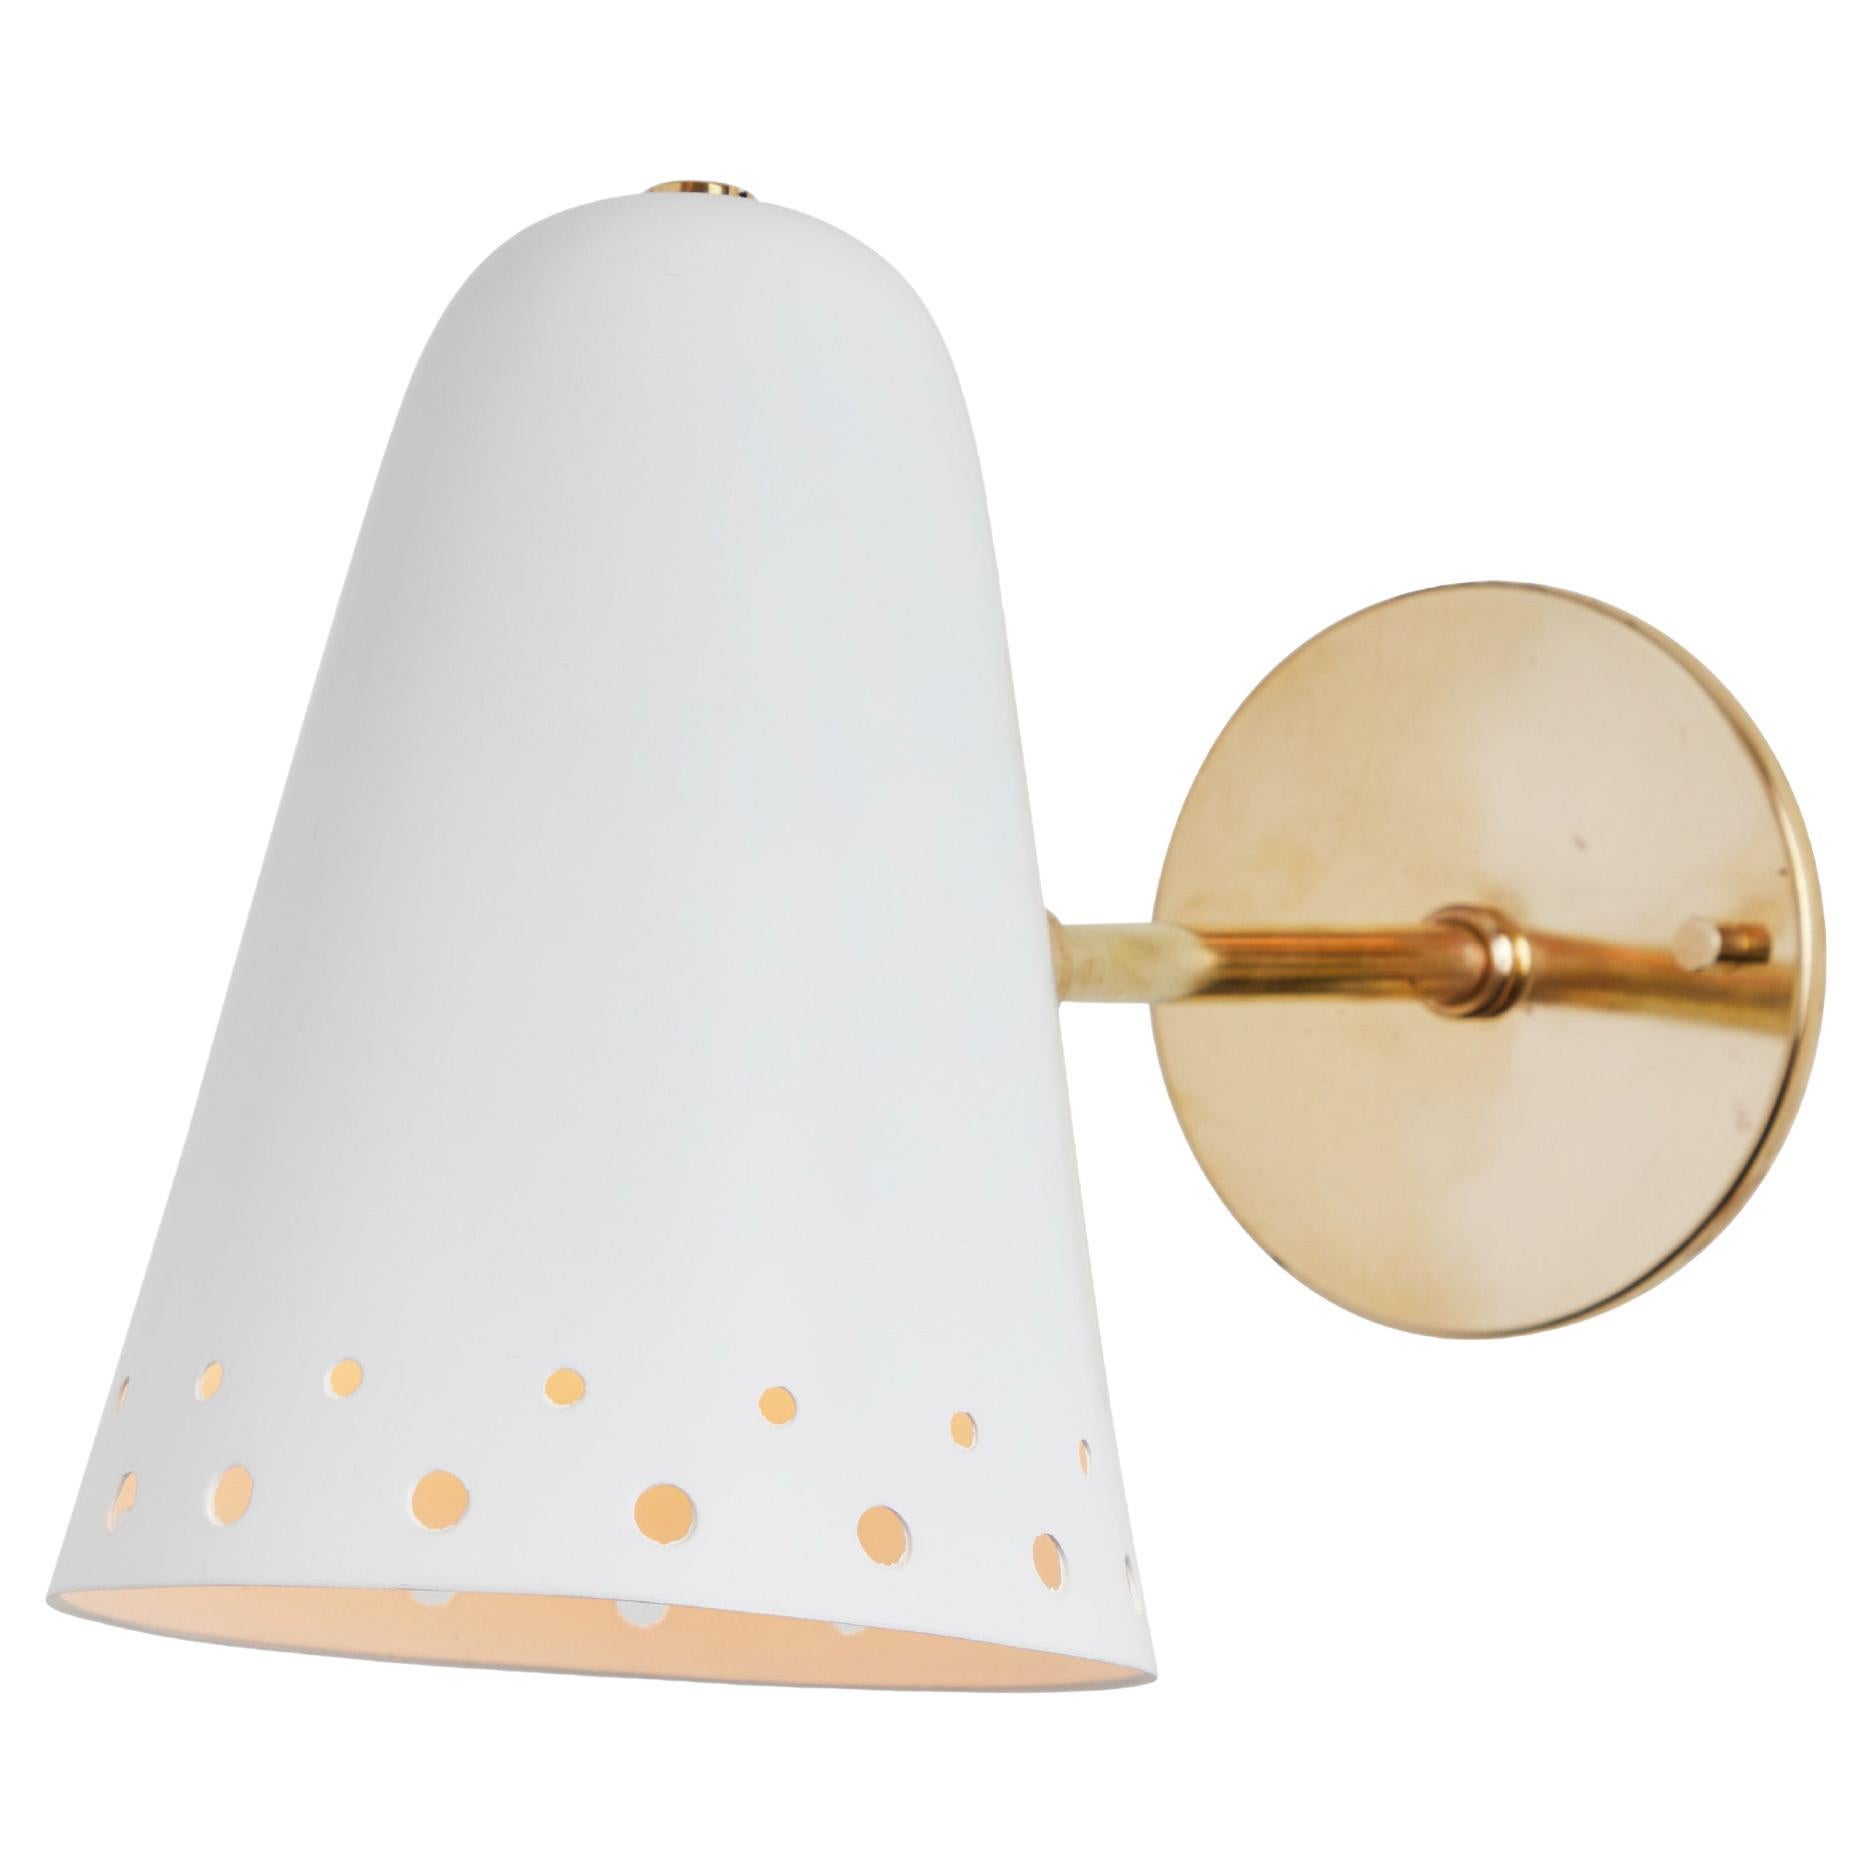 Rare 1950s Robert Mathieu Perforated White Metal and Brass Wall Sconce For Sale